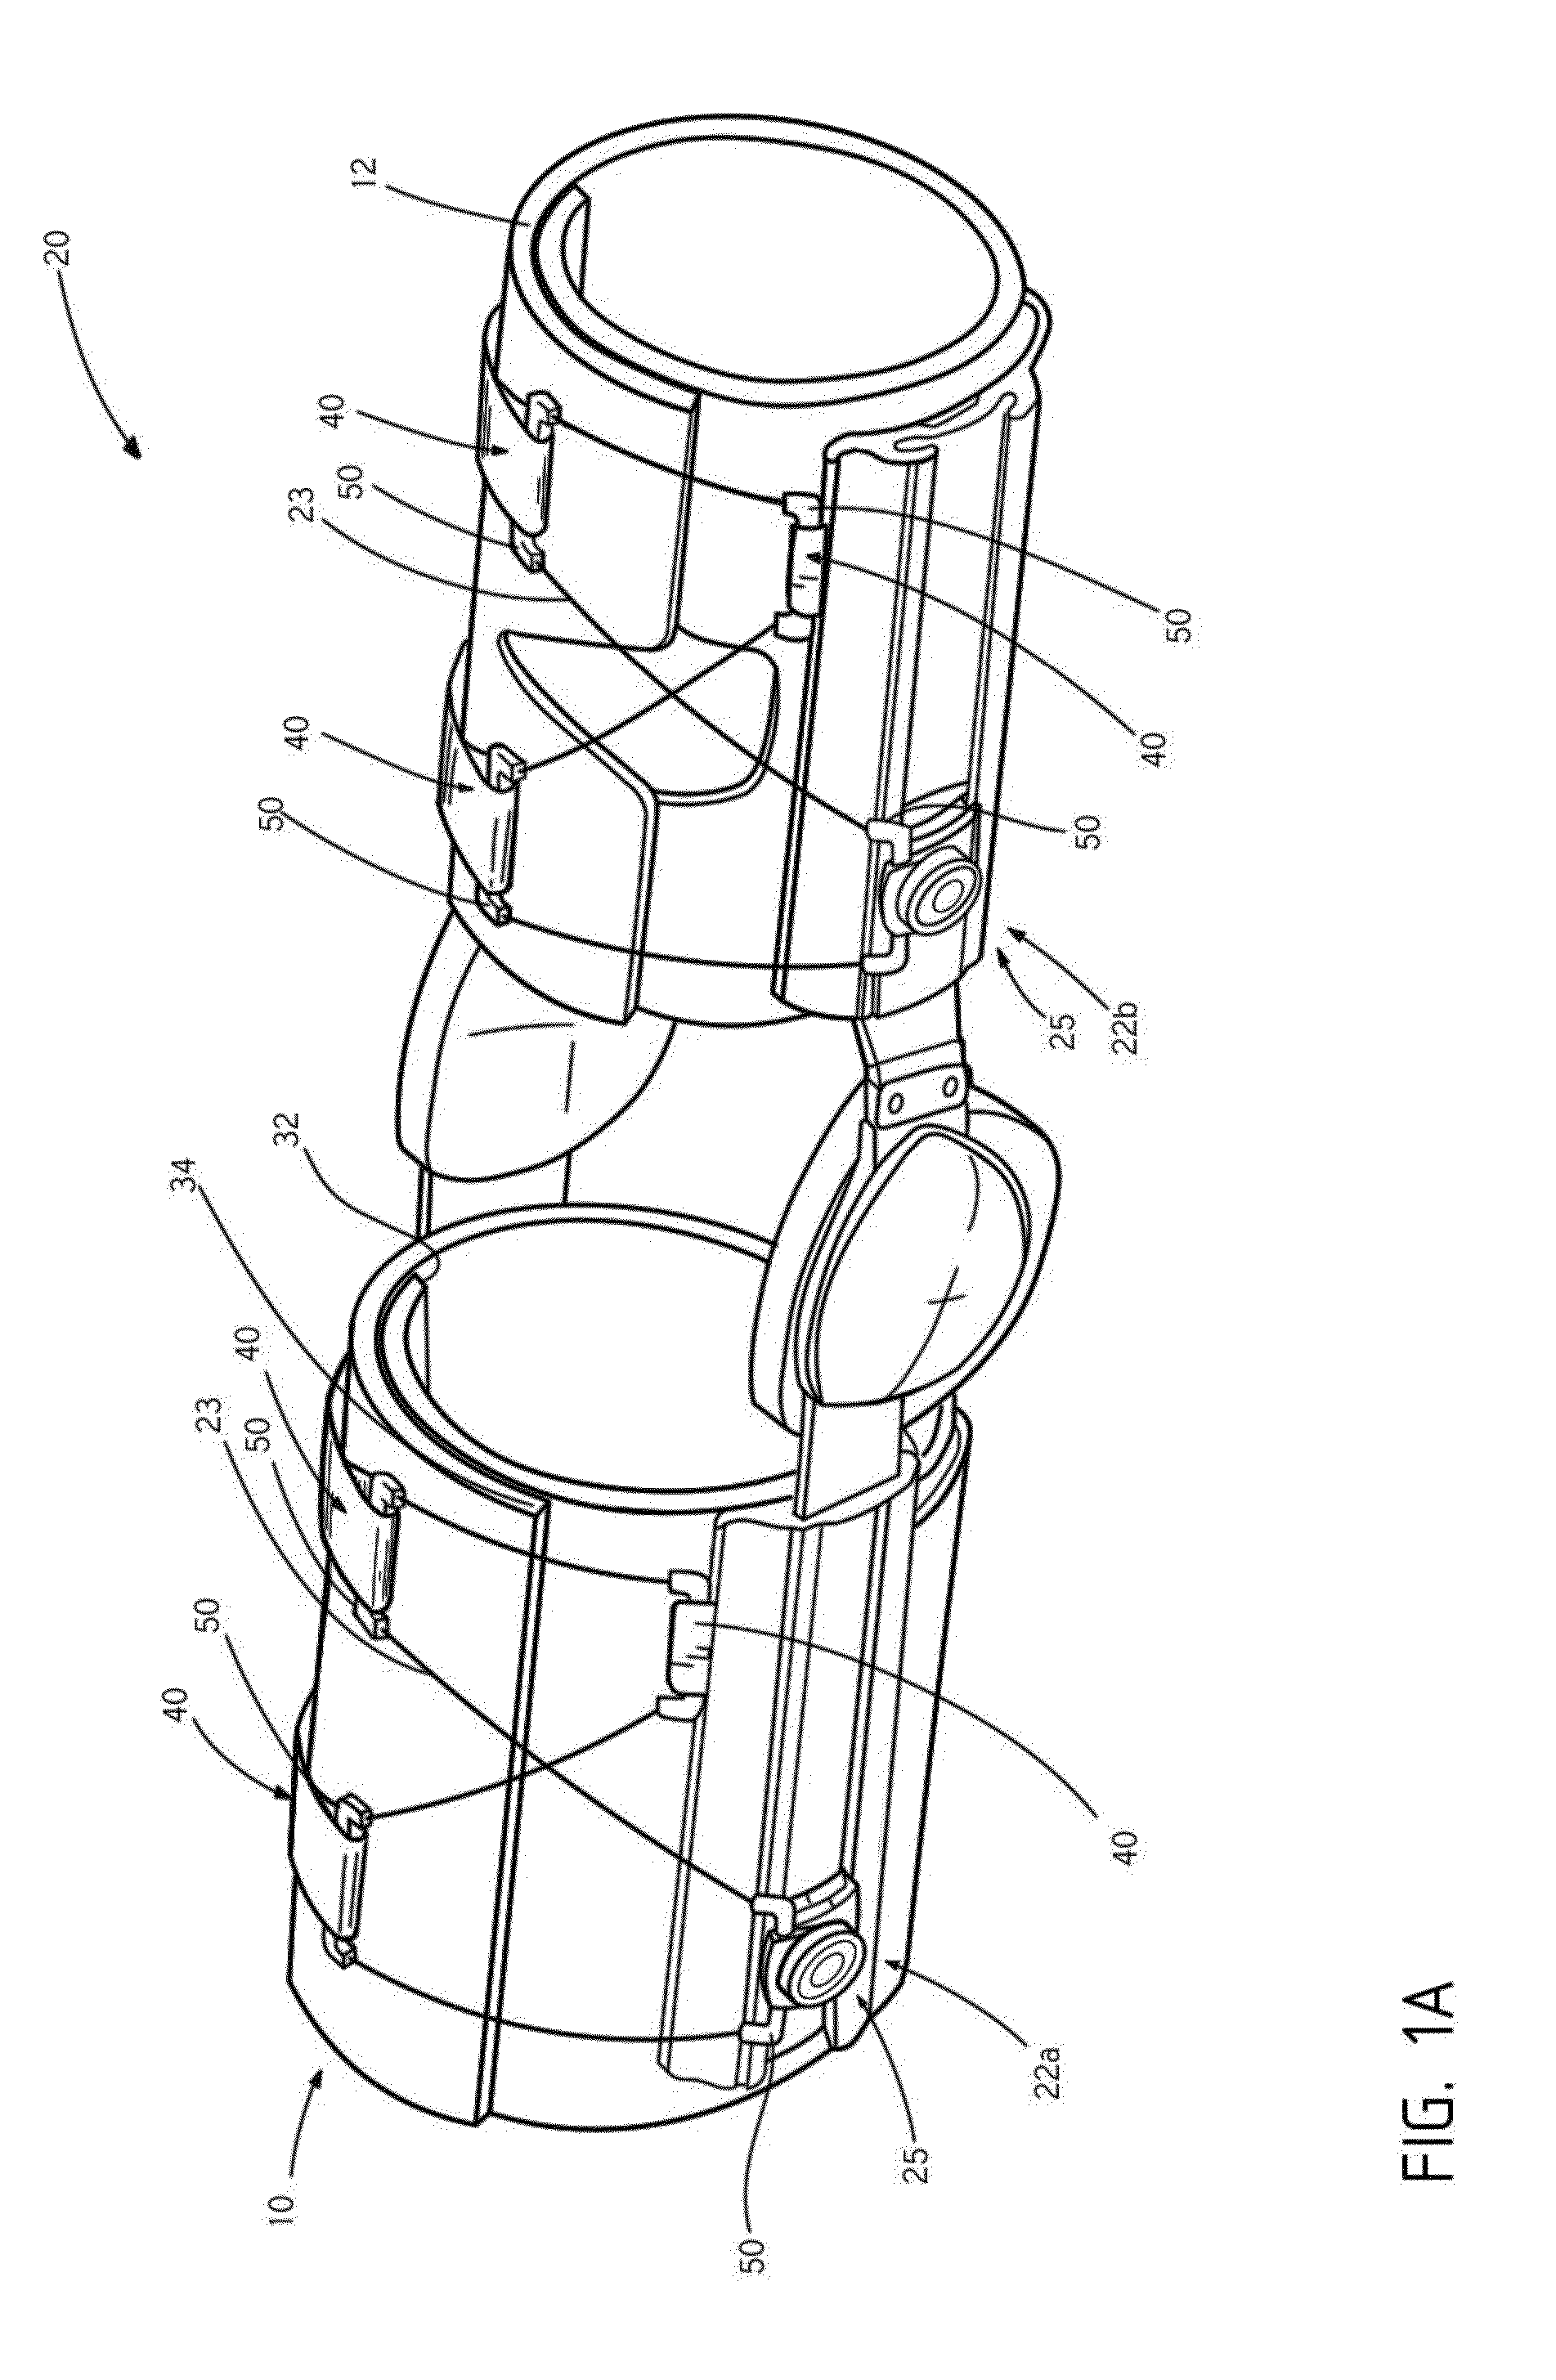 Systems, methods, and devices for automatic closure of medical devices